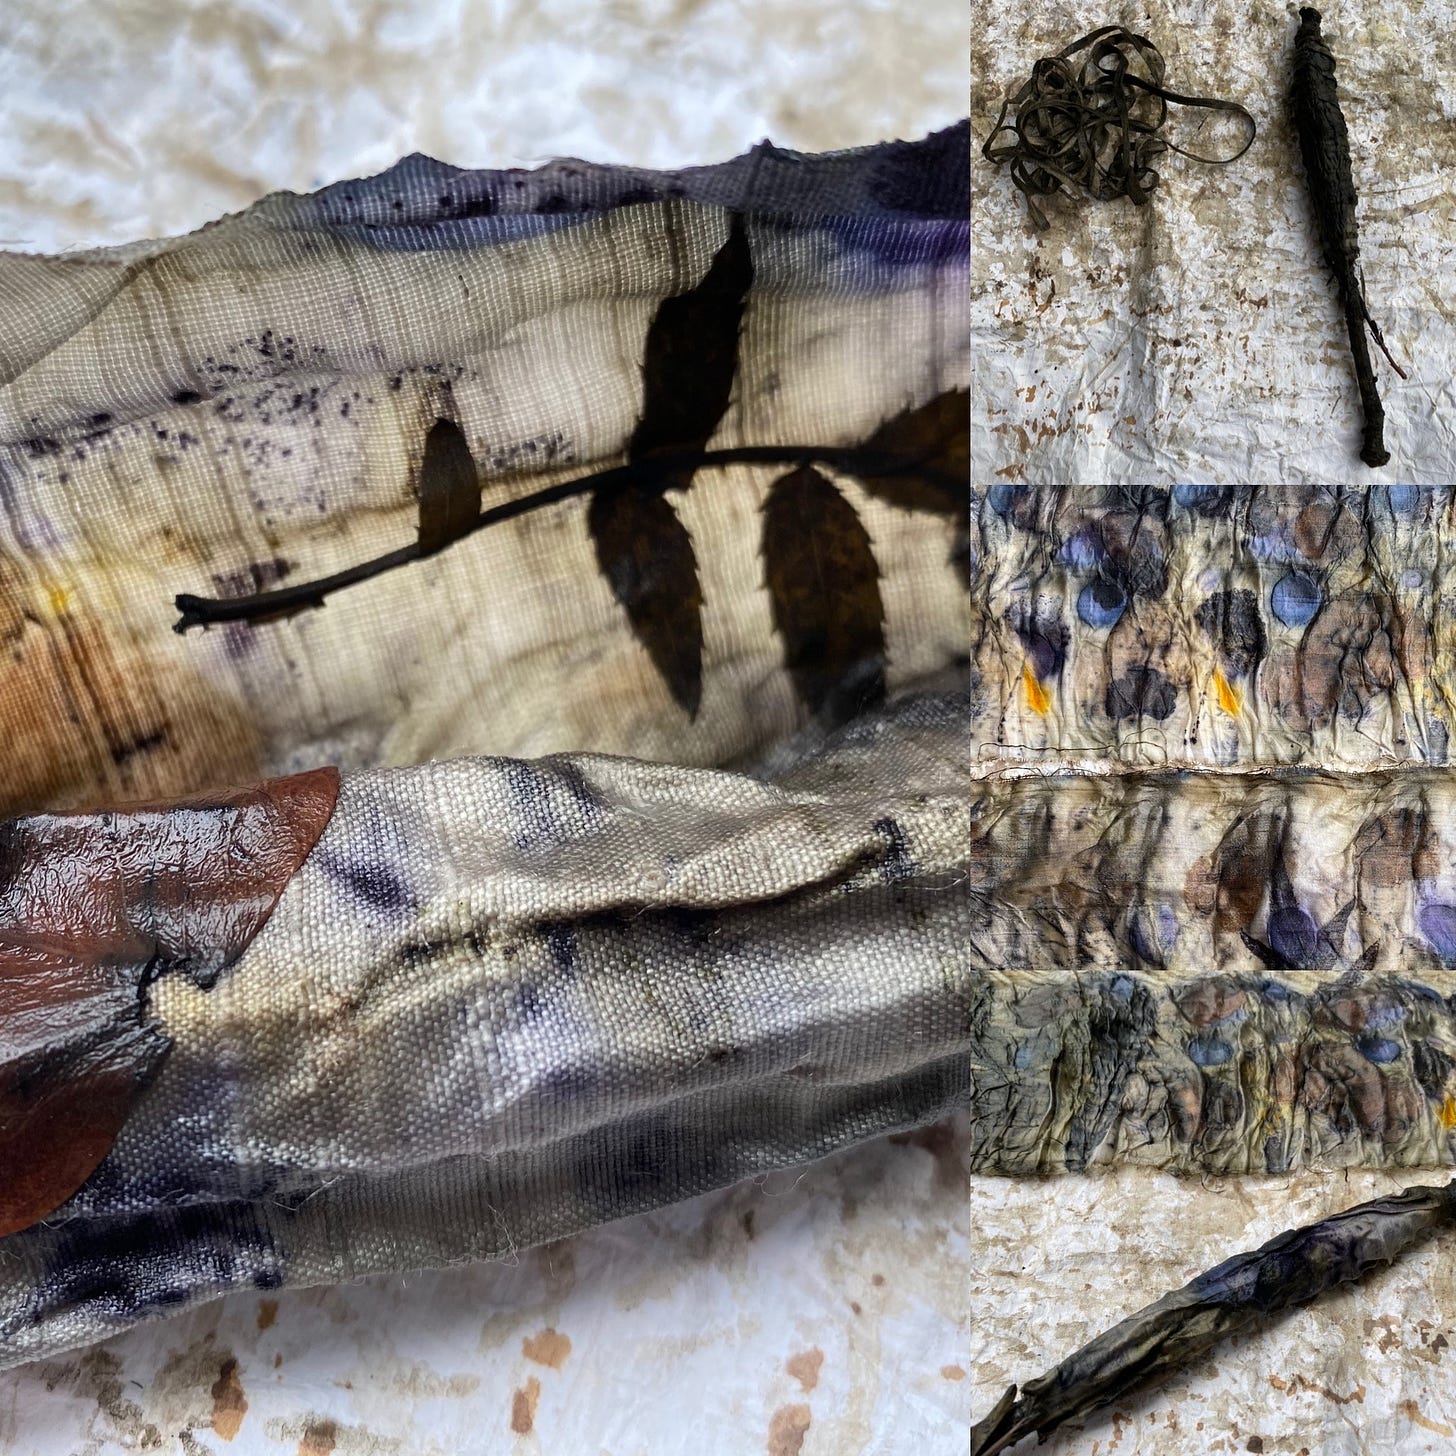 a composite of images of botanically printed cloth with leaf shapes in silhouette and patches of blue, yellow and greys